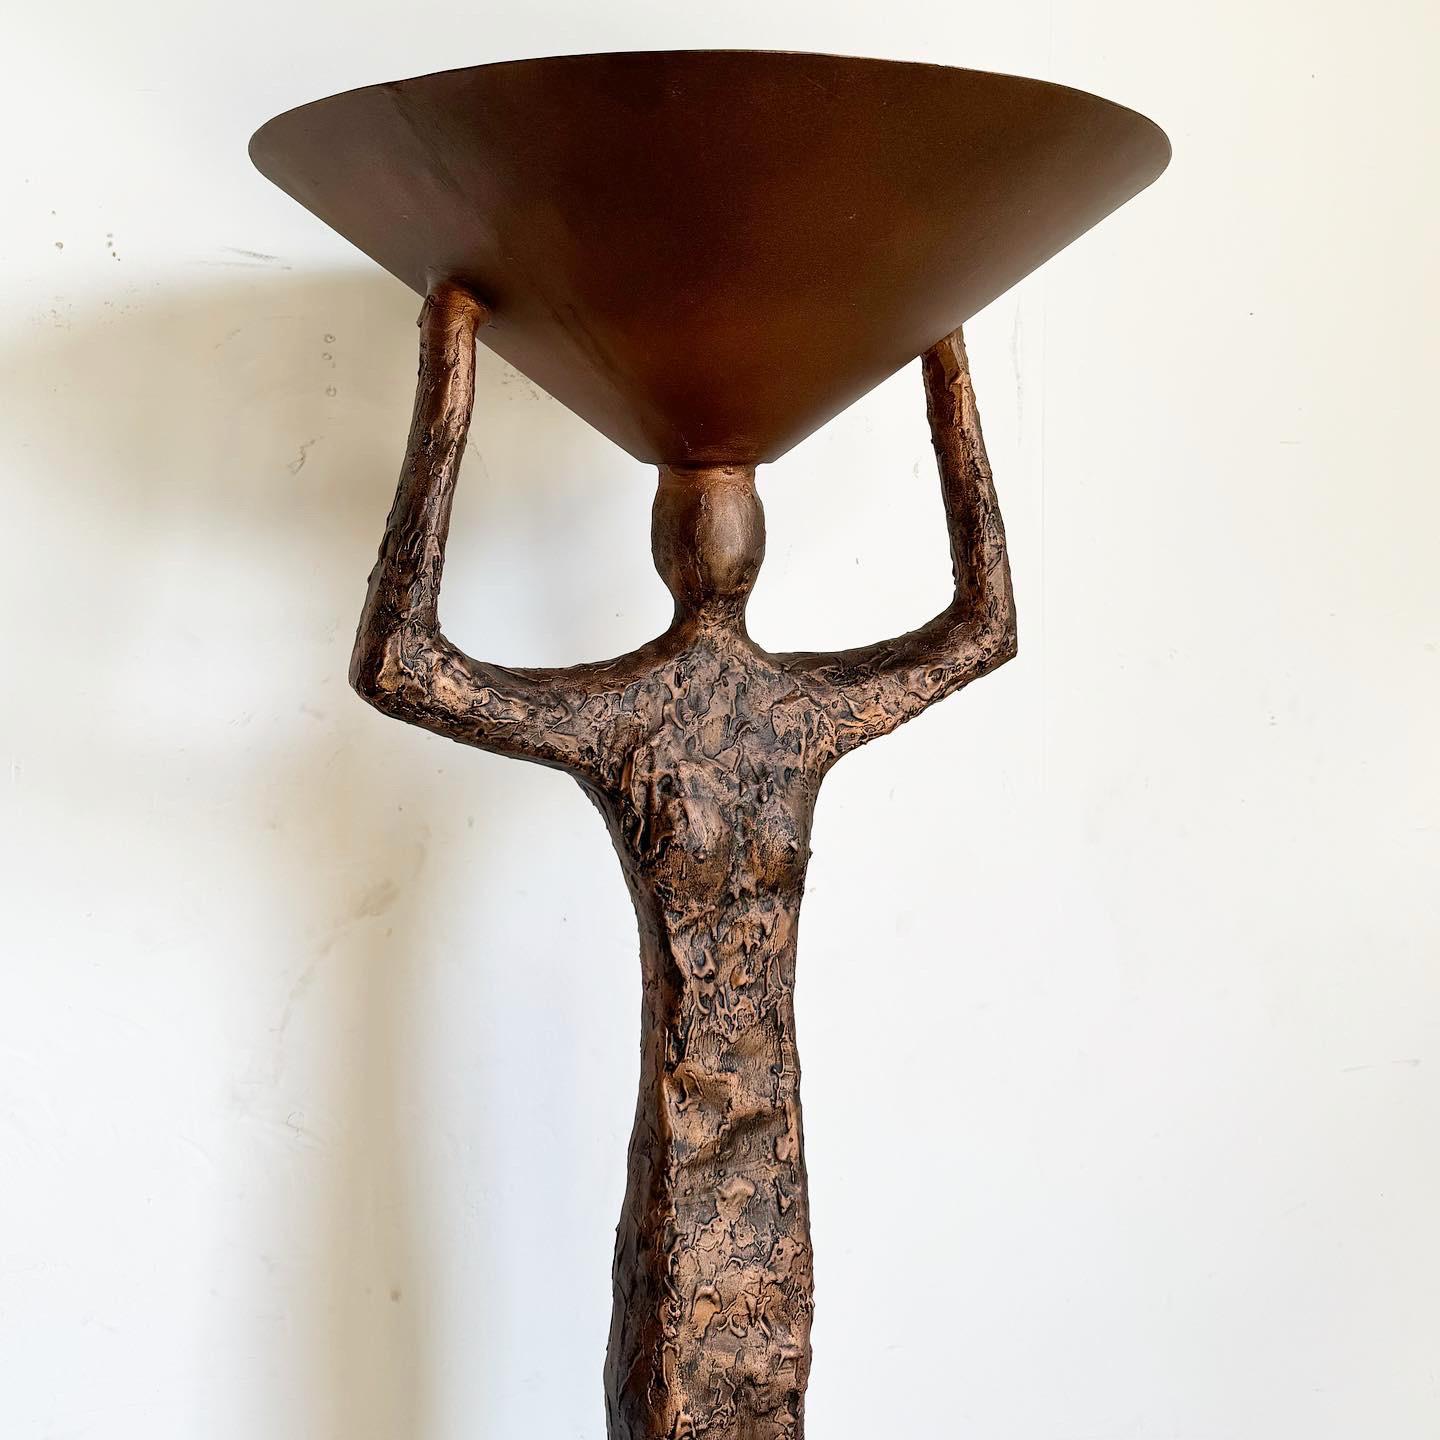 Philippine Giacometti Style Sculpture Floor Lamp Torchiere